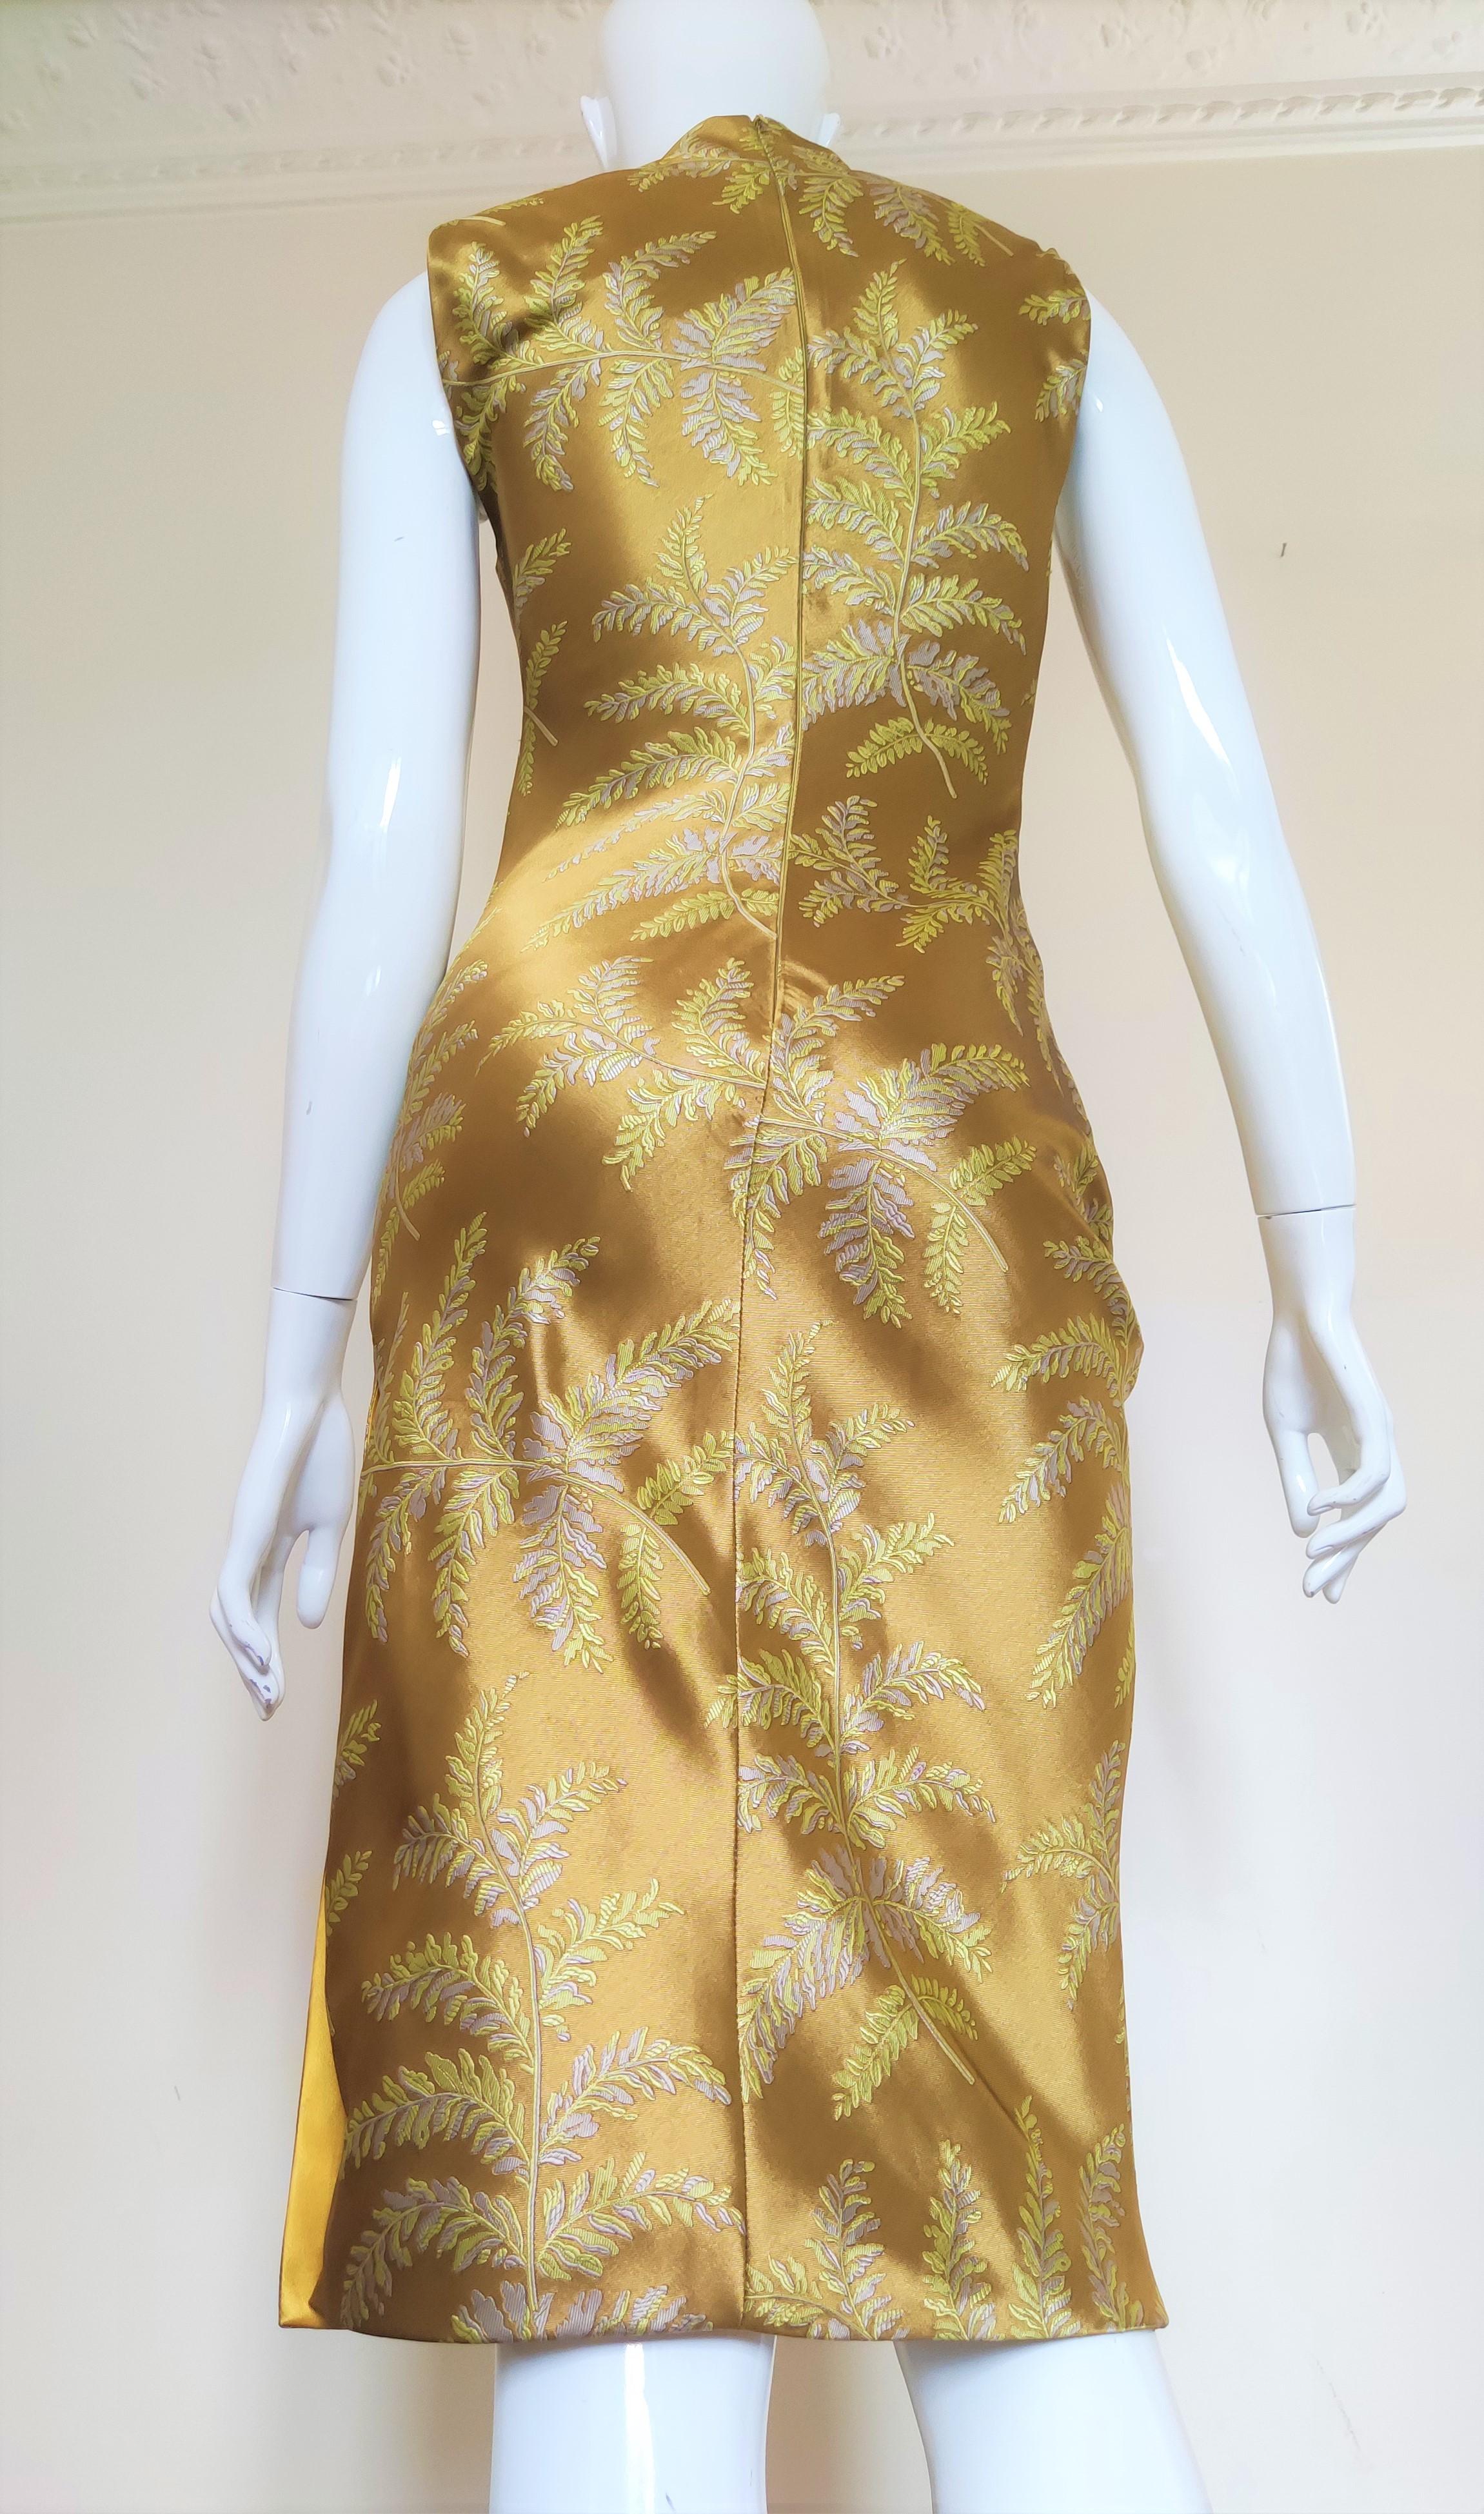 Atelier Gianni Versace Silk Mustard Yellow Floral Leaf Evening Baroque Dress For Sale 4